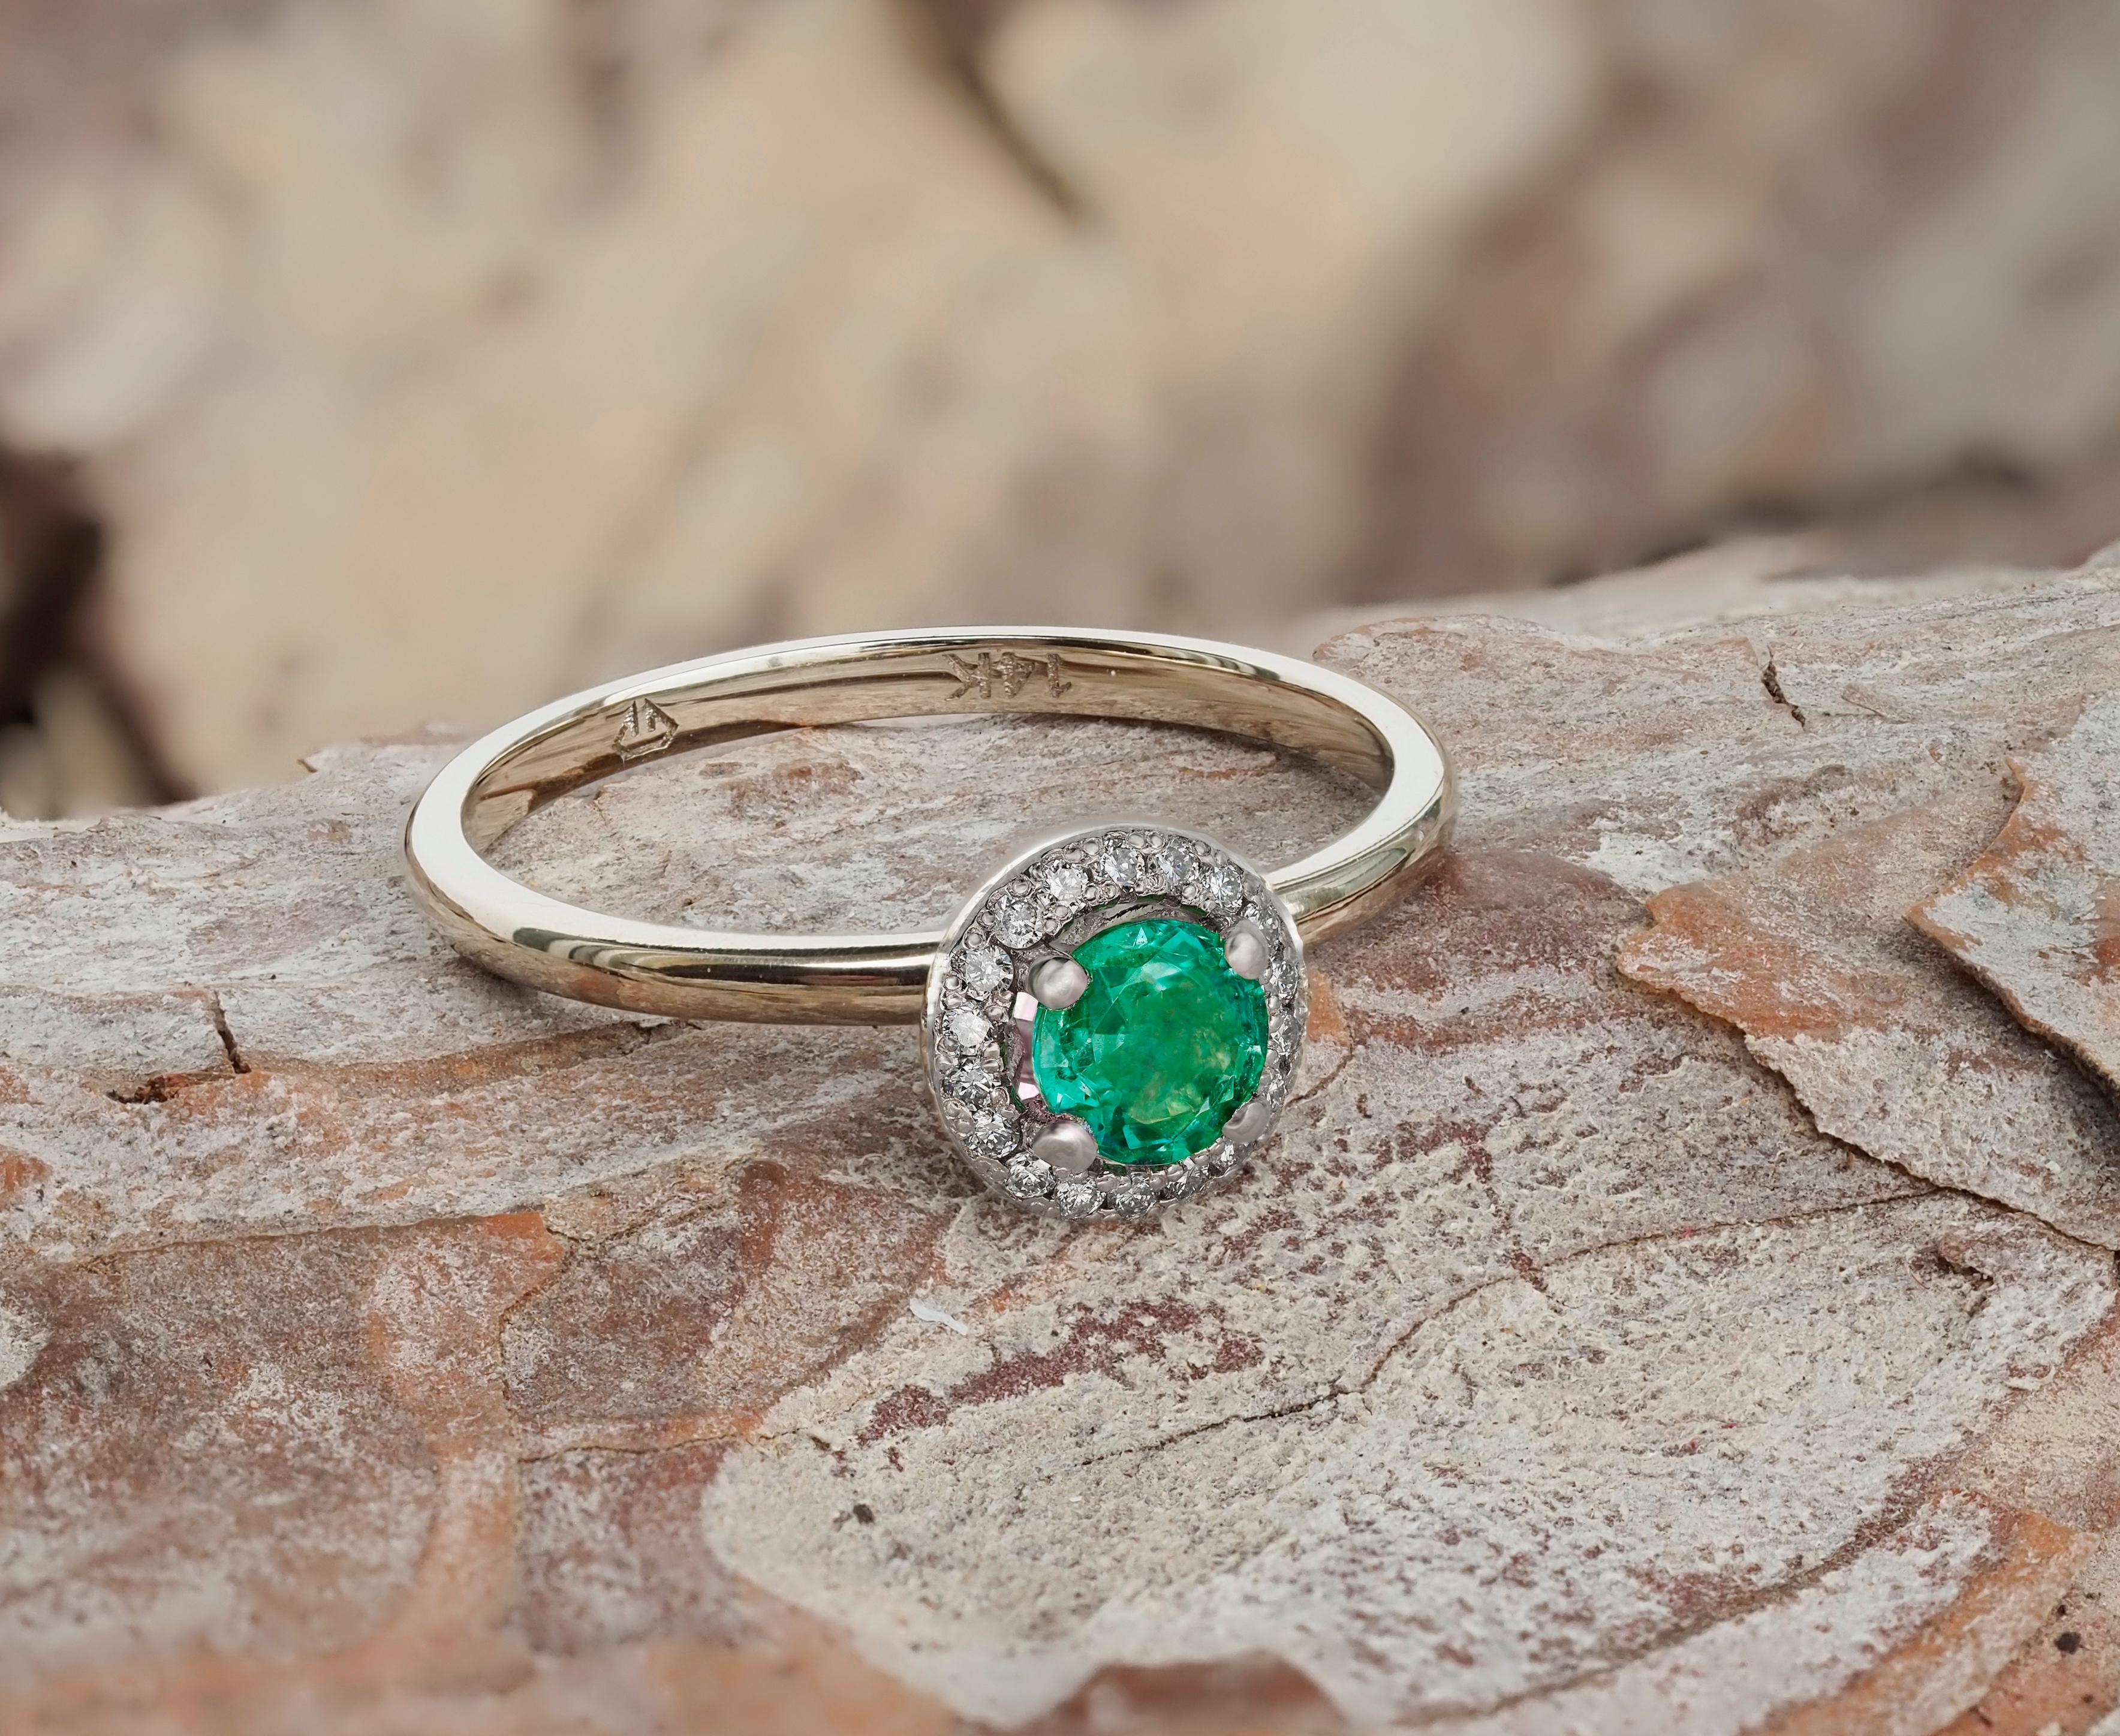 For Sale:  Emerald and Diamonds 14k gold ring.  Emerald Halo Gold Ring. 2